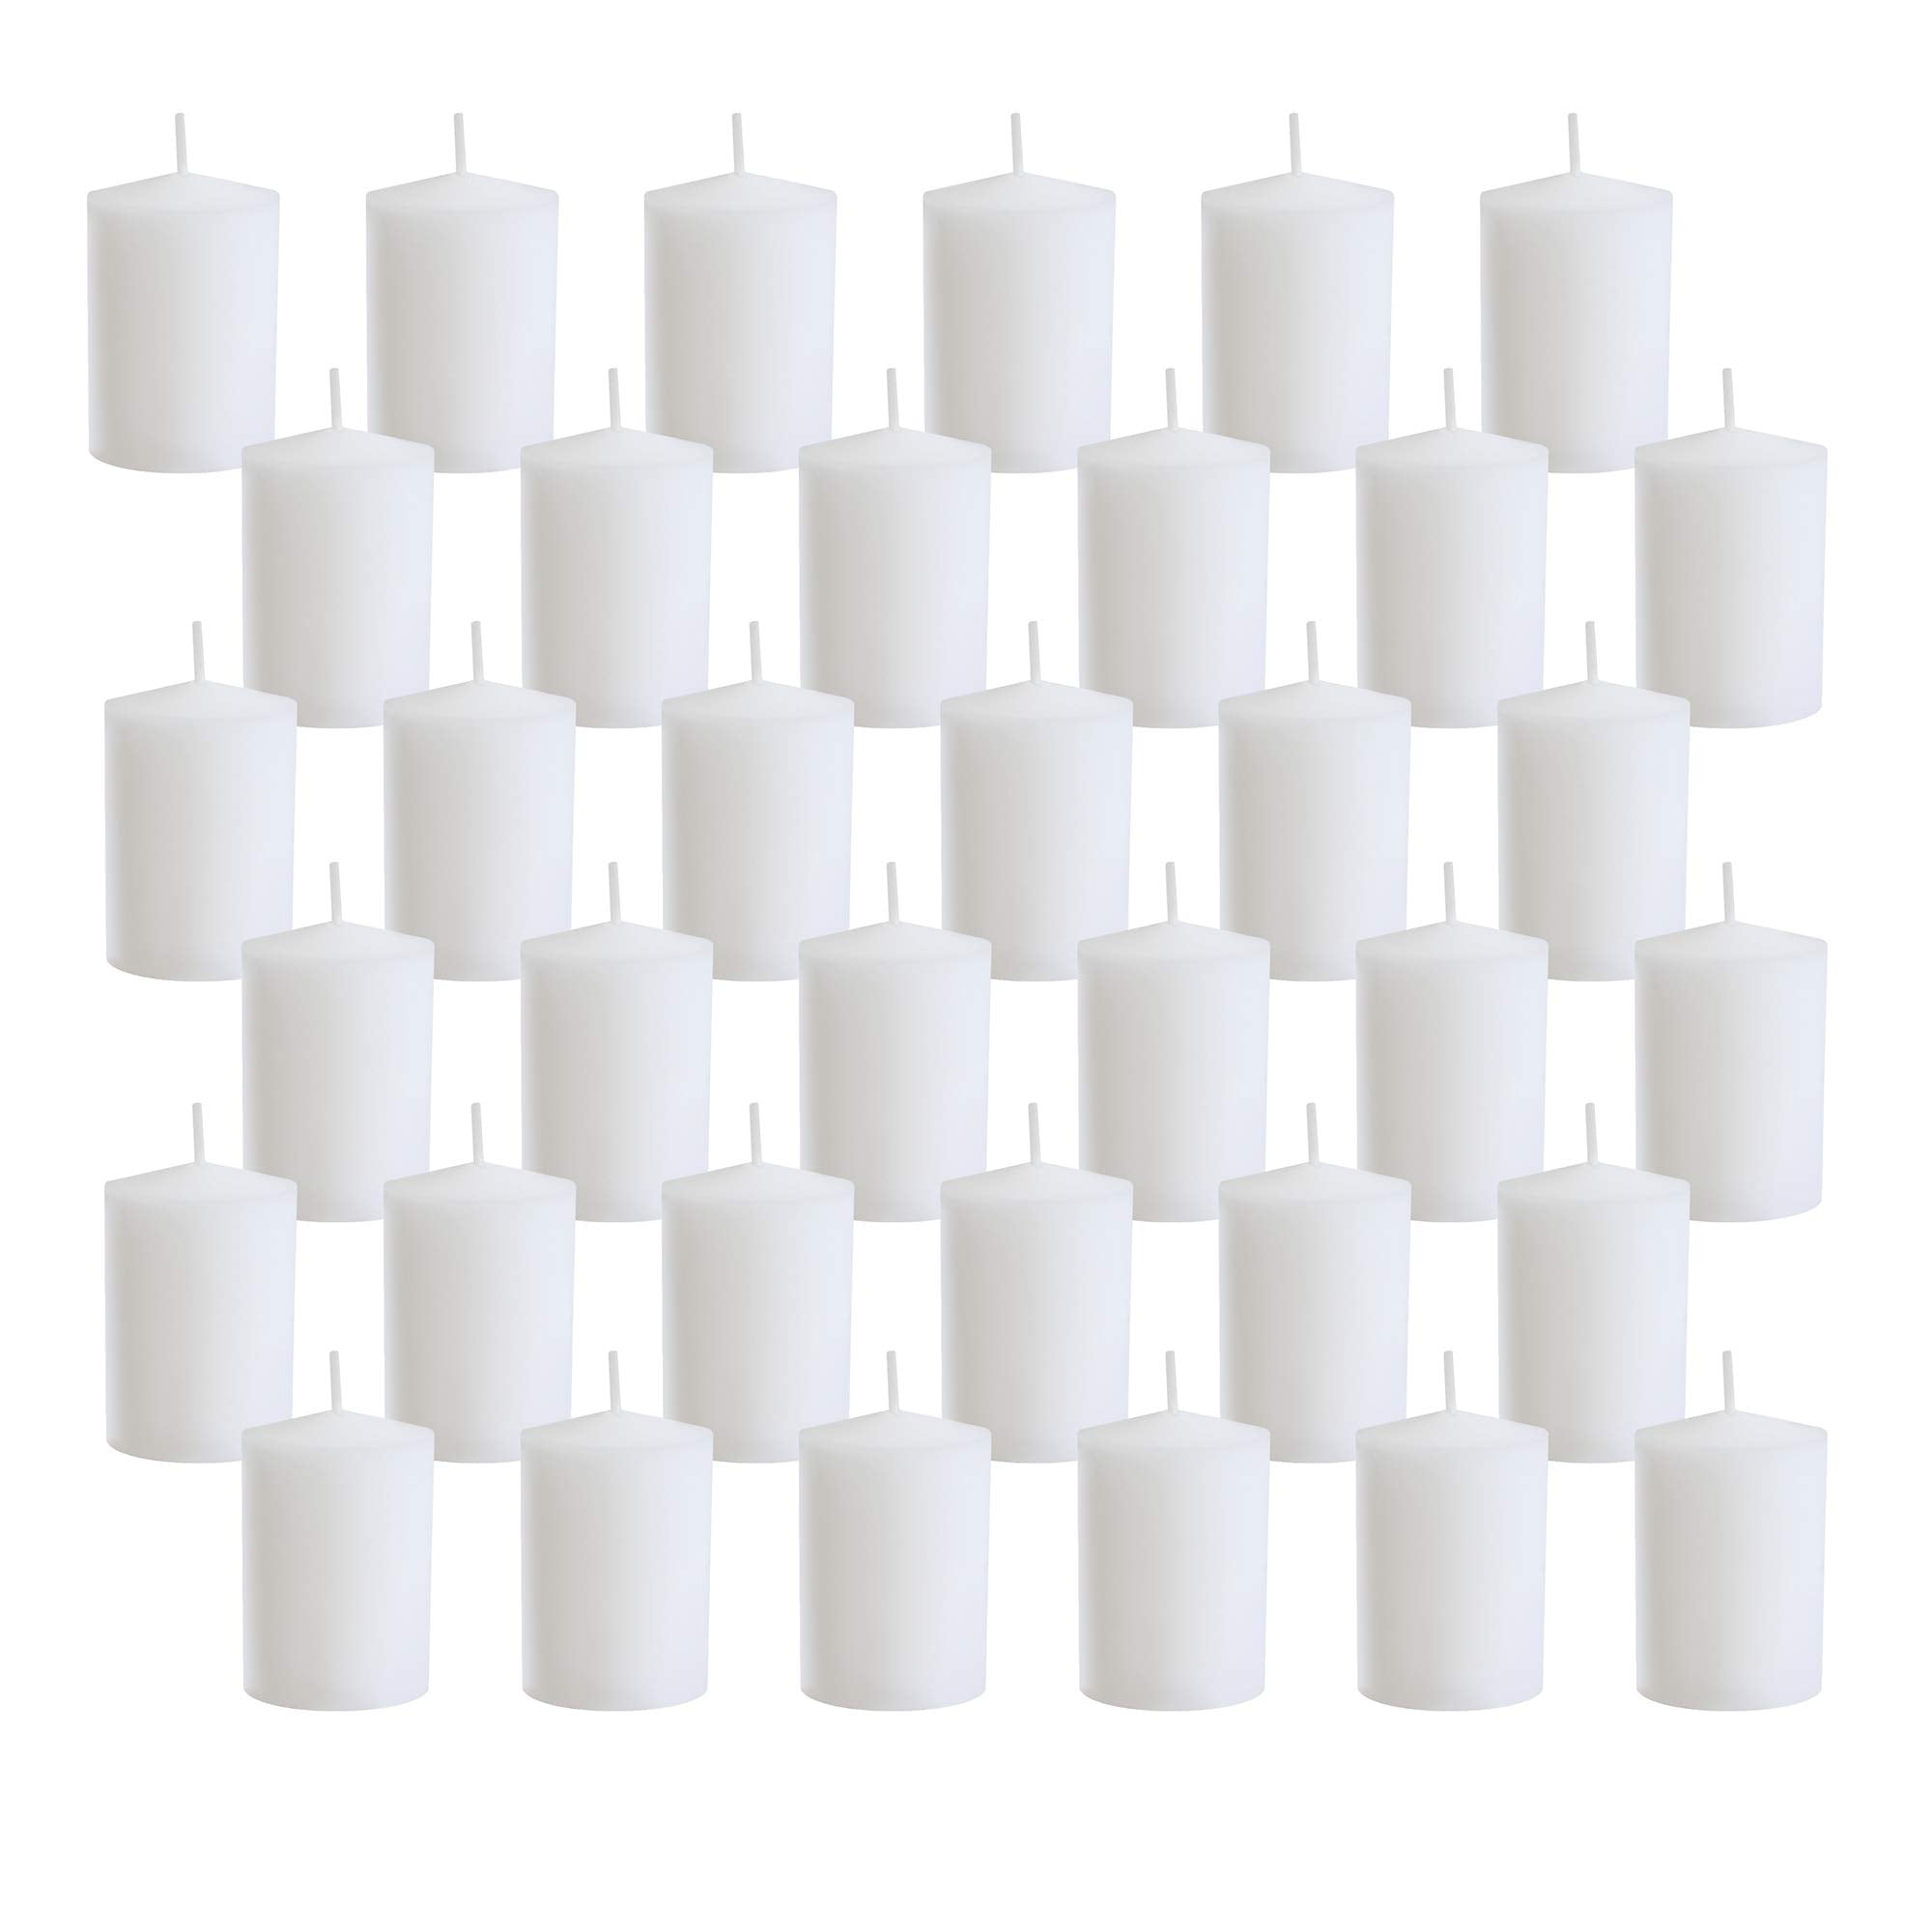 LumaBase White Wax Votive Candles - Pack of 36, Long-Lasting 15